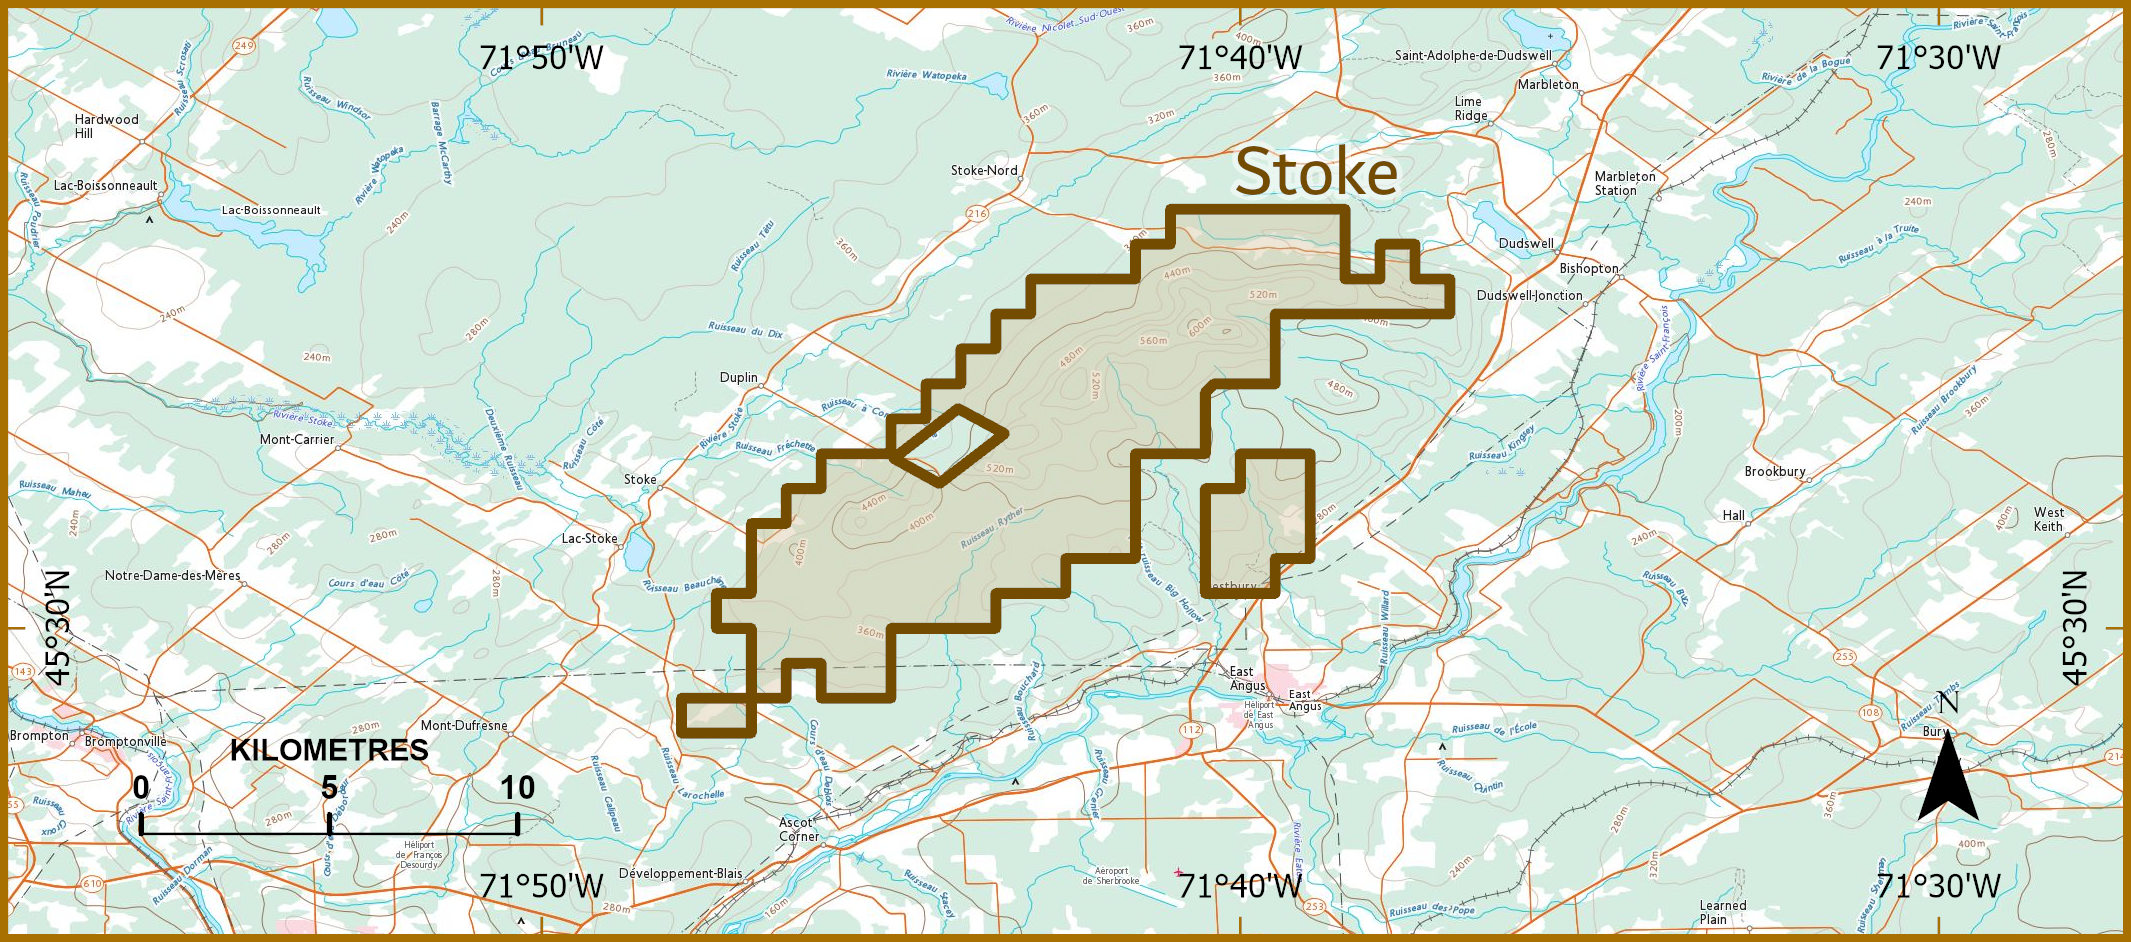 Detailed Map showing Project Stoke